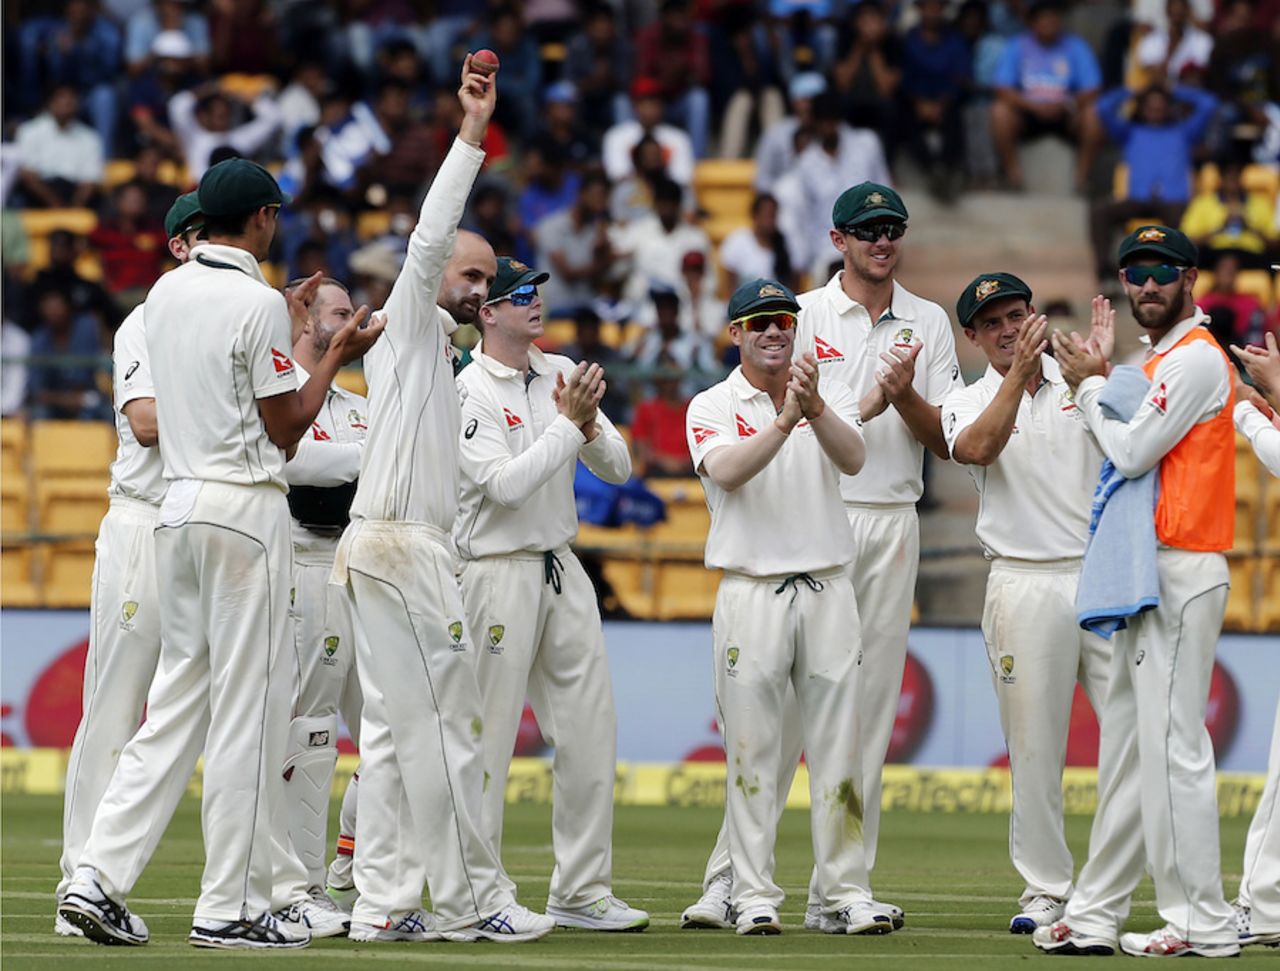 Nathan Lyon gets an applause after his five-for, India v Australia, 2nd Test, 1st day, Bengaluru, March 4, 2017